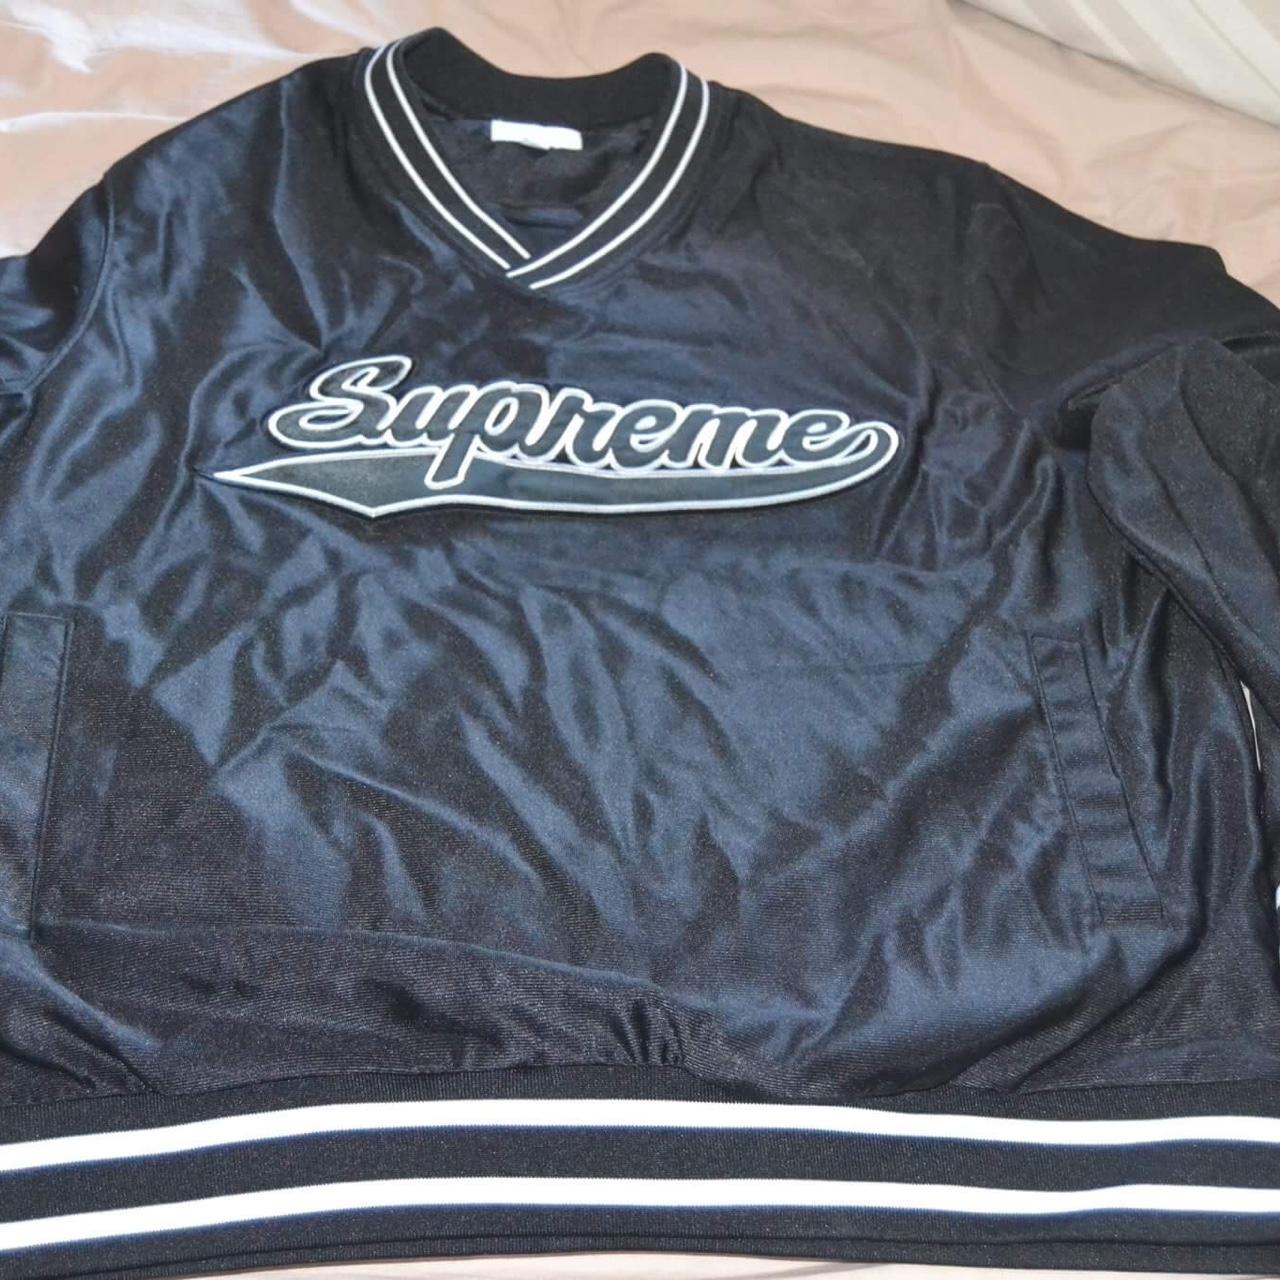 Supreme baseball warm up top. Selling for a friend